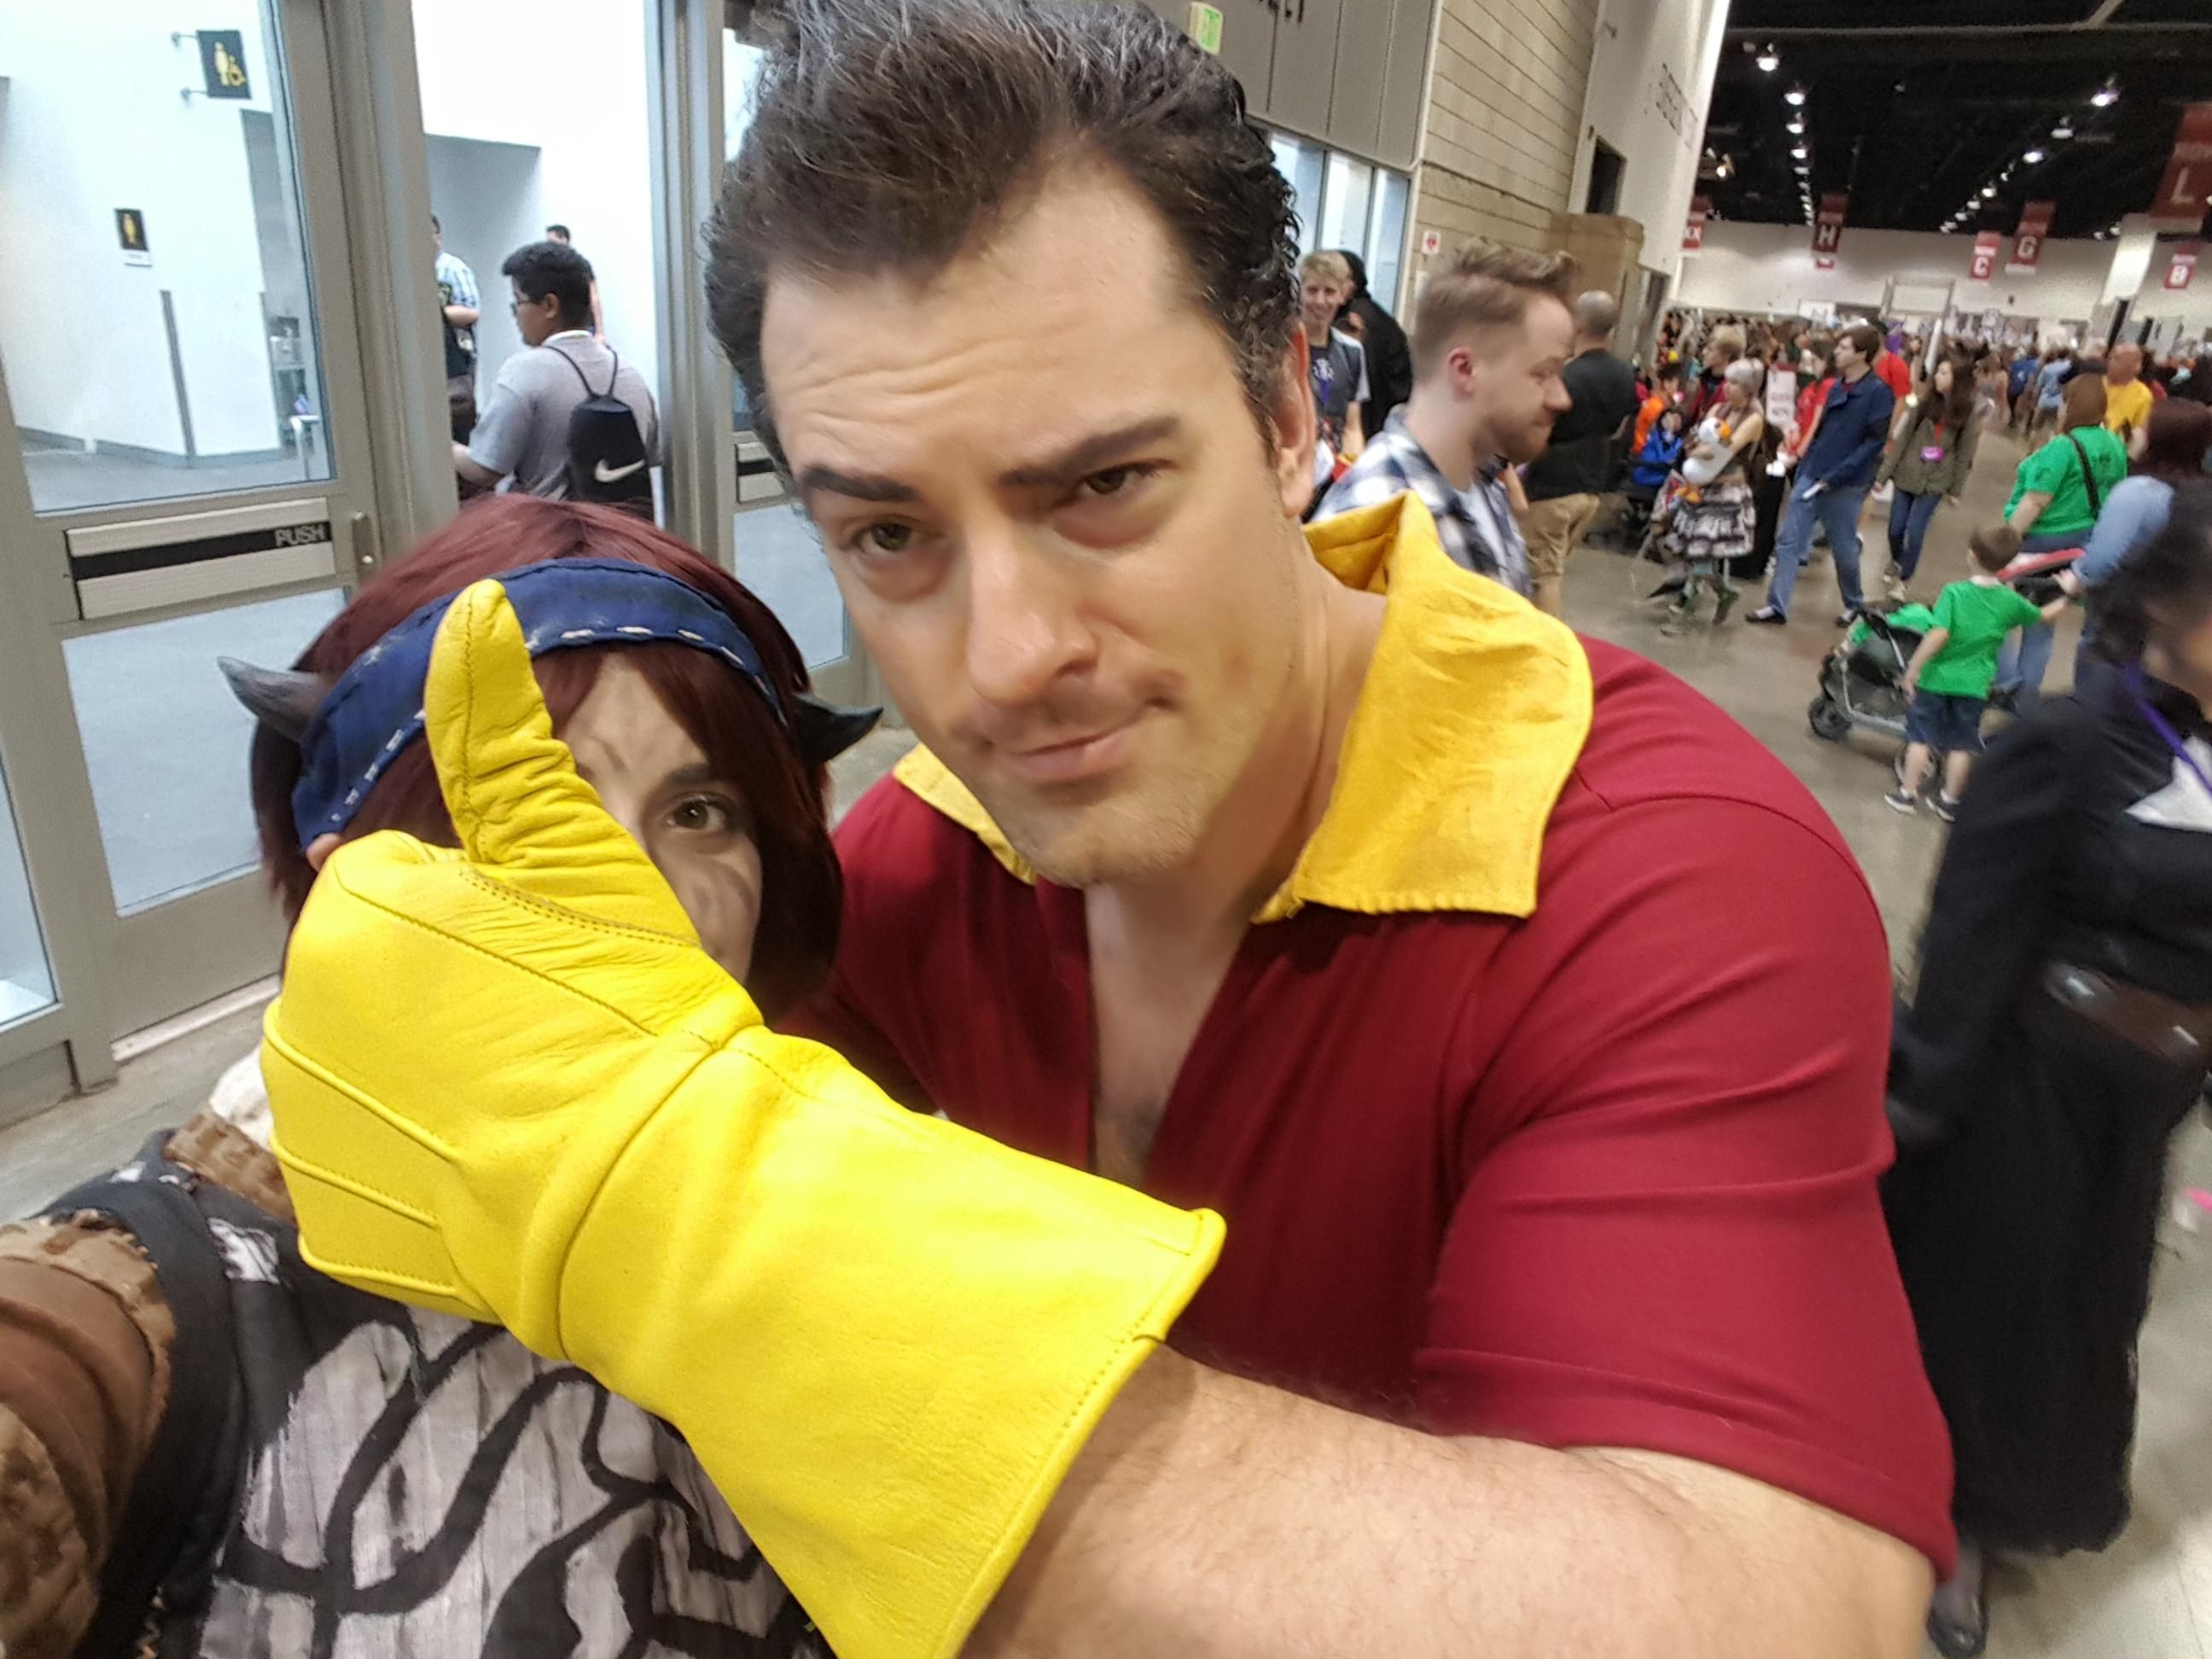 Requests selfie with Gaston. Shouldn't have expected any less...